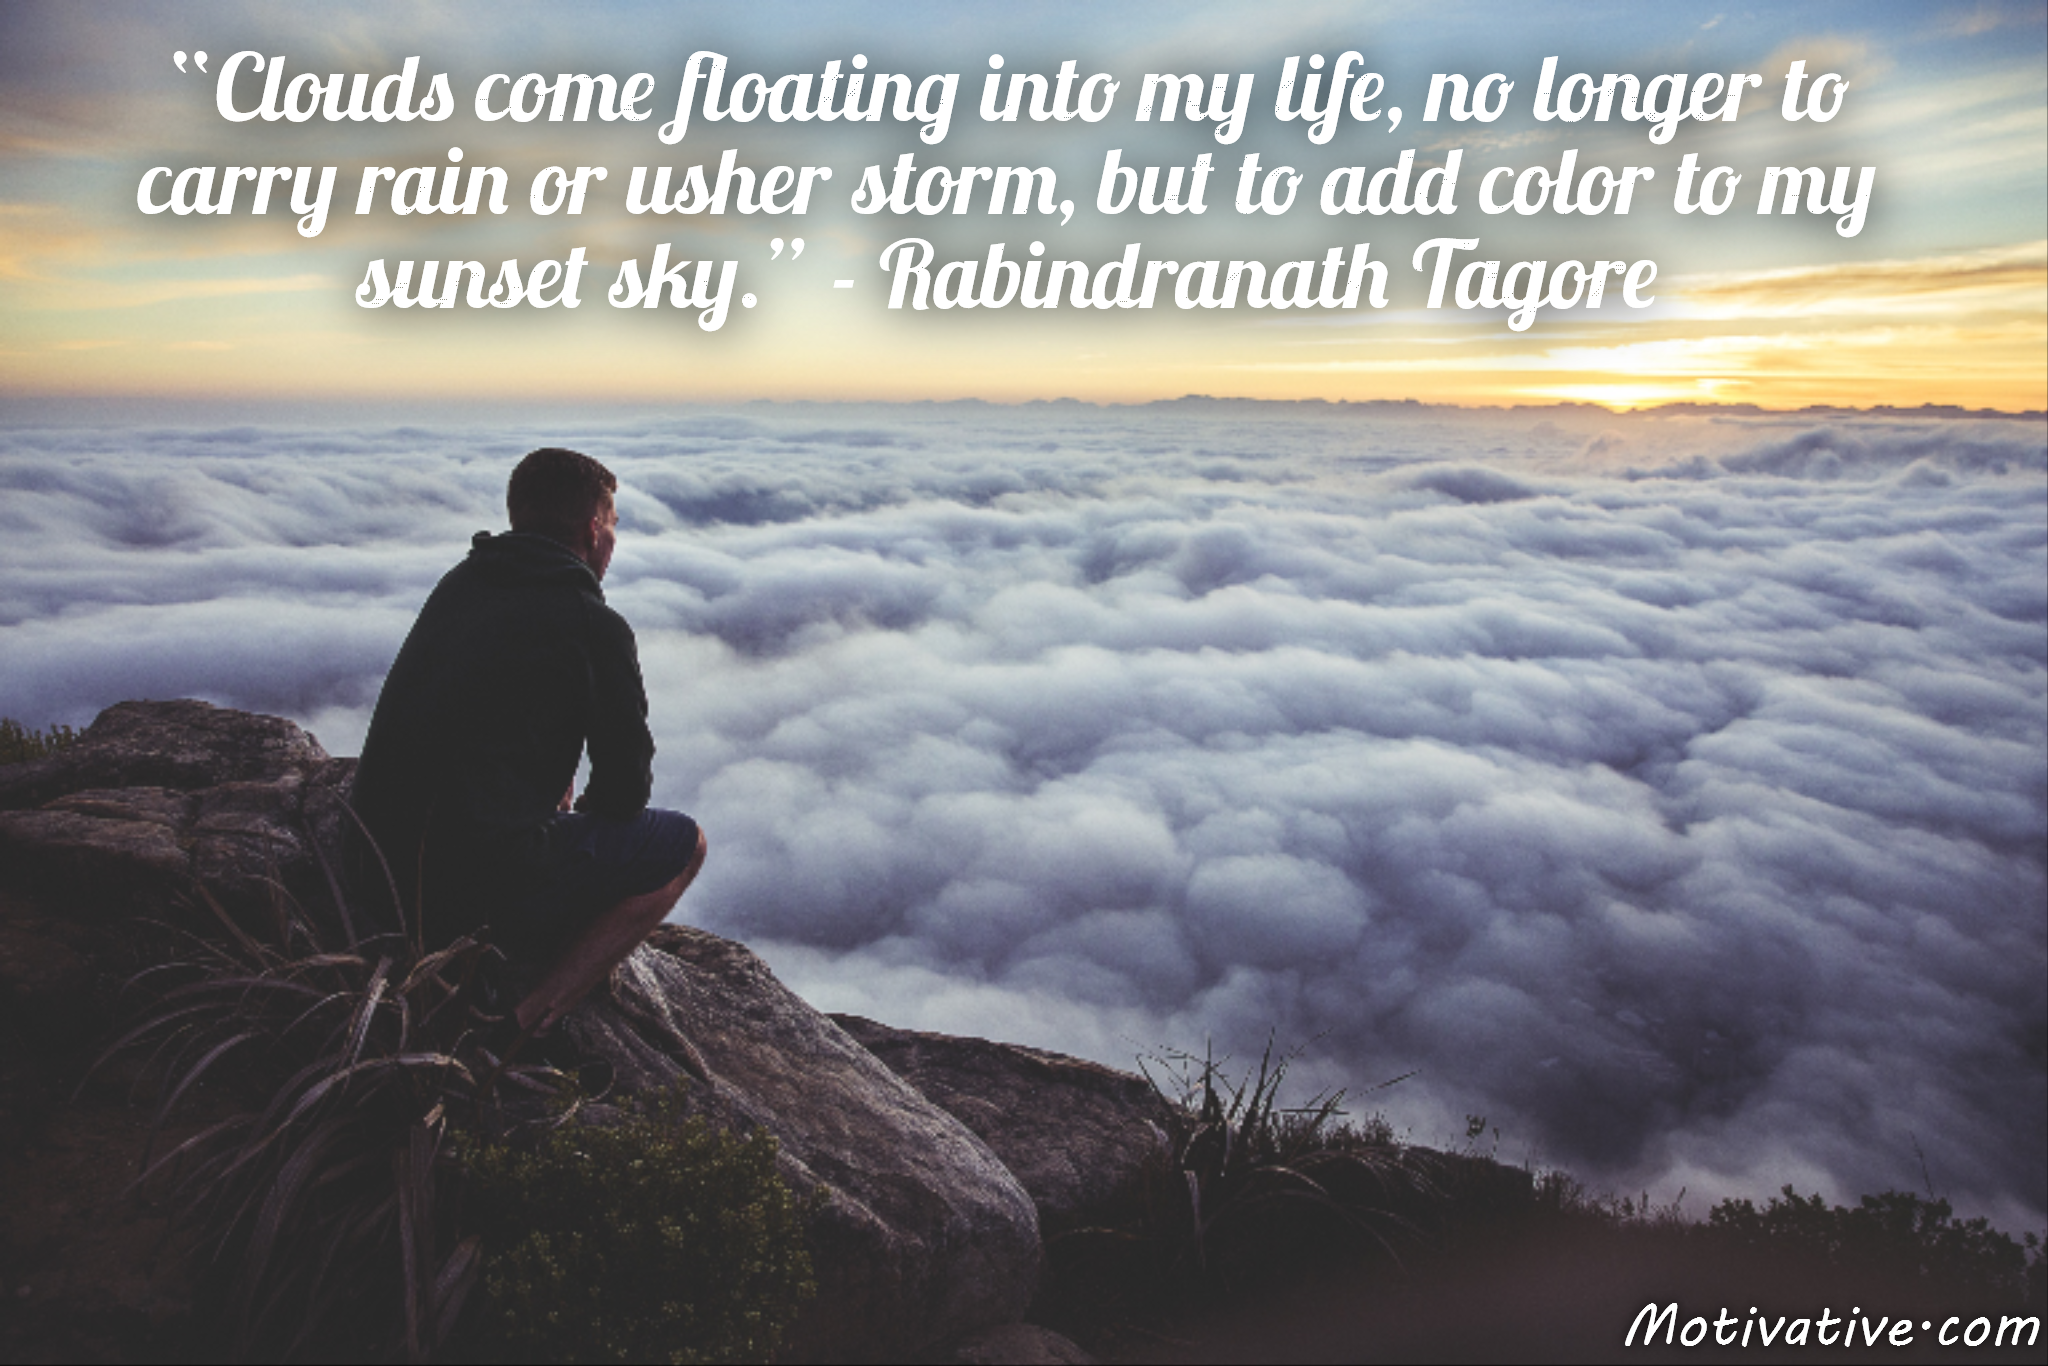 Clouds come floating into my life, no longer to carry rain or usher storm, but to add color to my sunset sky. – Rabindranath Tagore